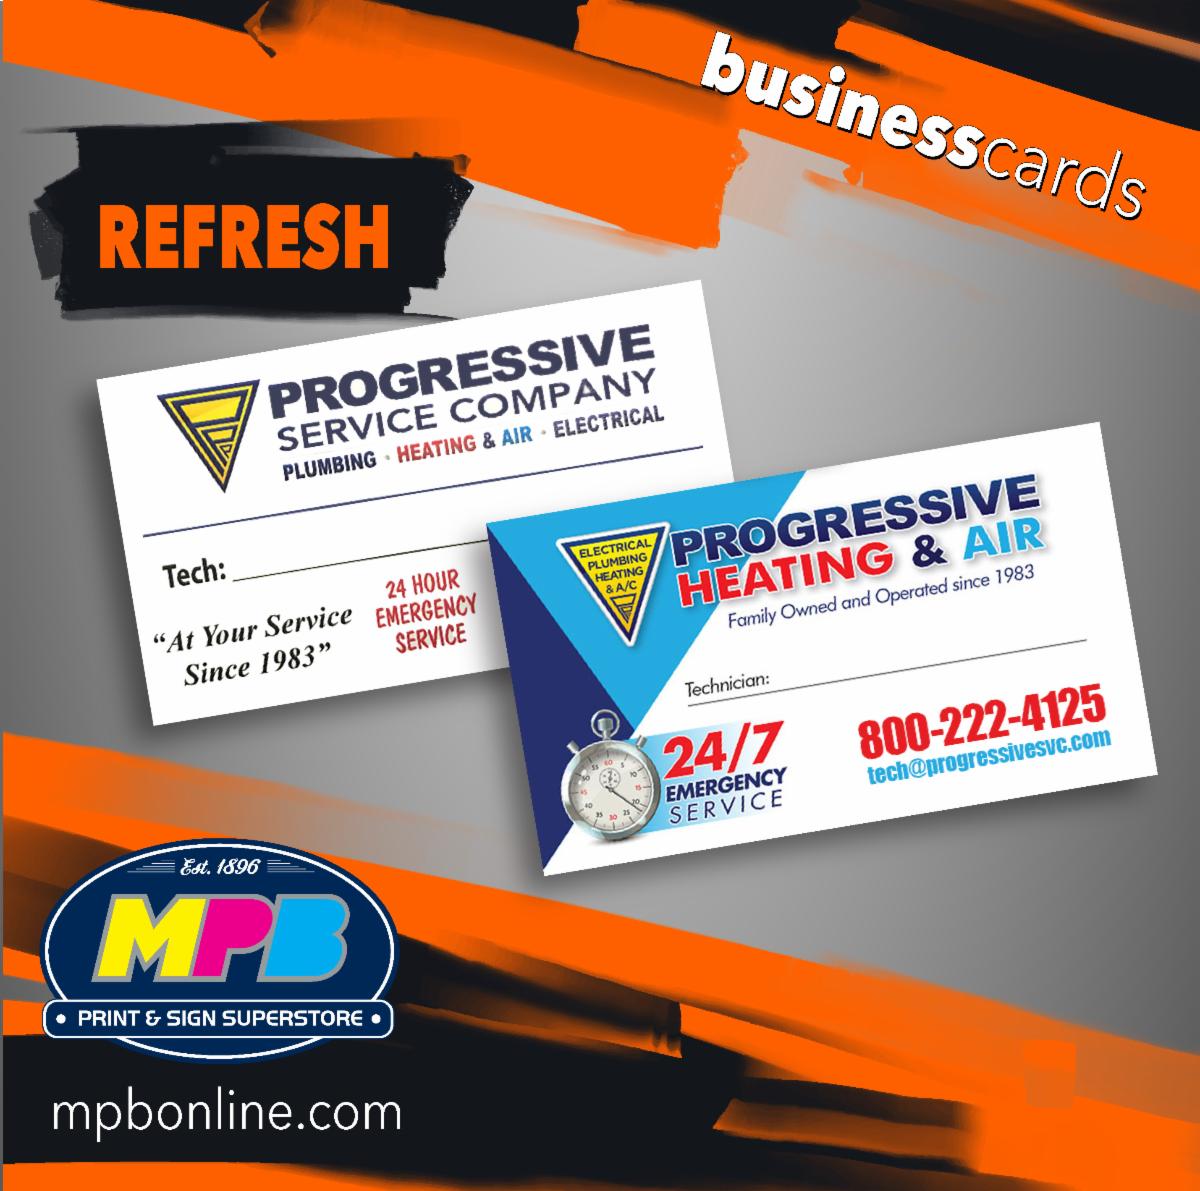 Is your brand looking a little tired? It might be time to refresh your print materials! Our design team can help you create a fresh, modern look that will make your brand stand out. #BrandRefresh #GraphicDesign #PrintMaterials
888.292.0001 • MPBonline.com